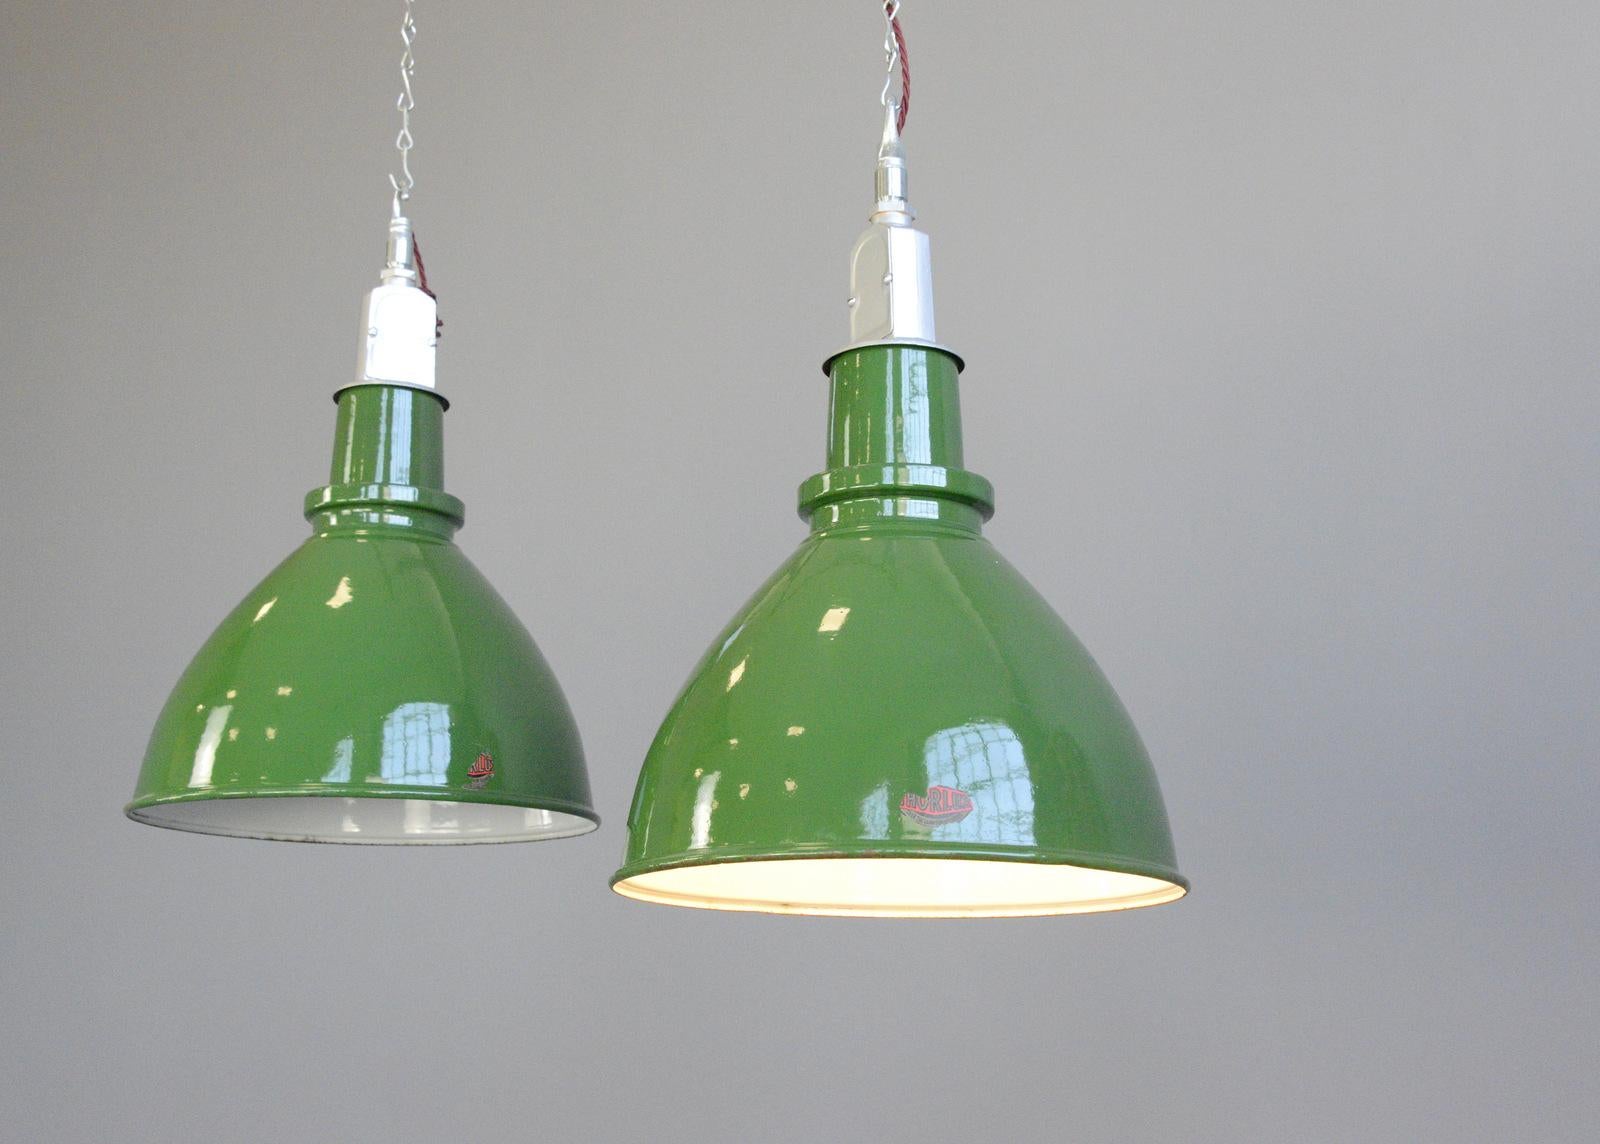 - Price is per light
- Vitreous green enamel shades
- White enamel inner reflectors
- Twist off tops
- Takes E27 fitting bulbs
- Comes with 100cm of red twist cable
- Comes with chain and ceiling hook
- Made by Thorlux
- English, 1950s
-